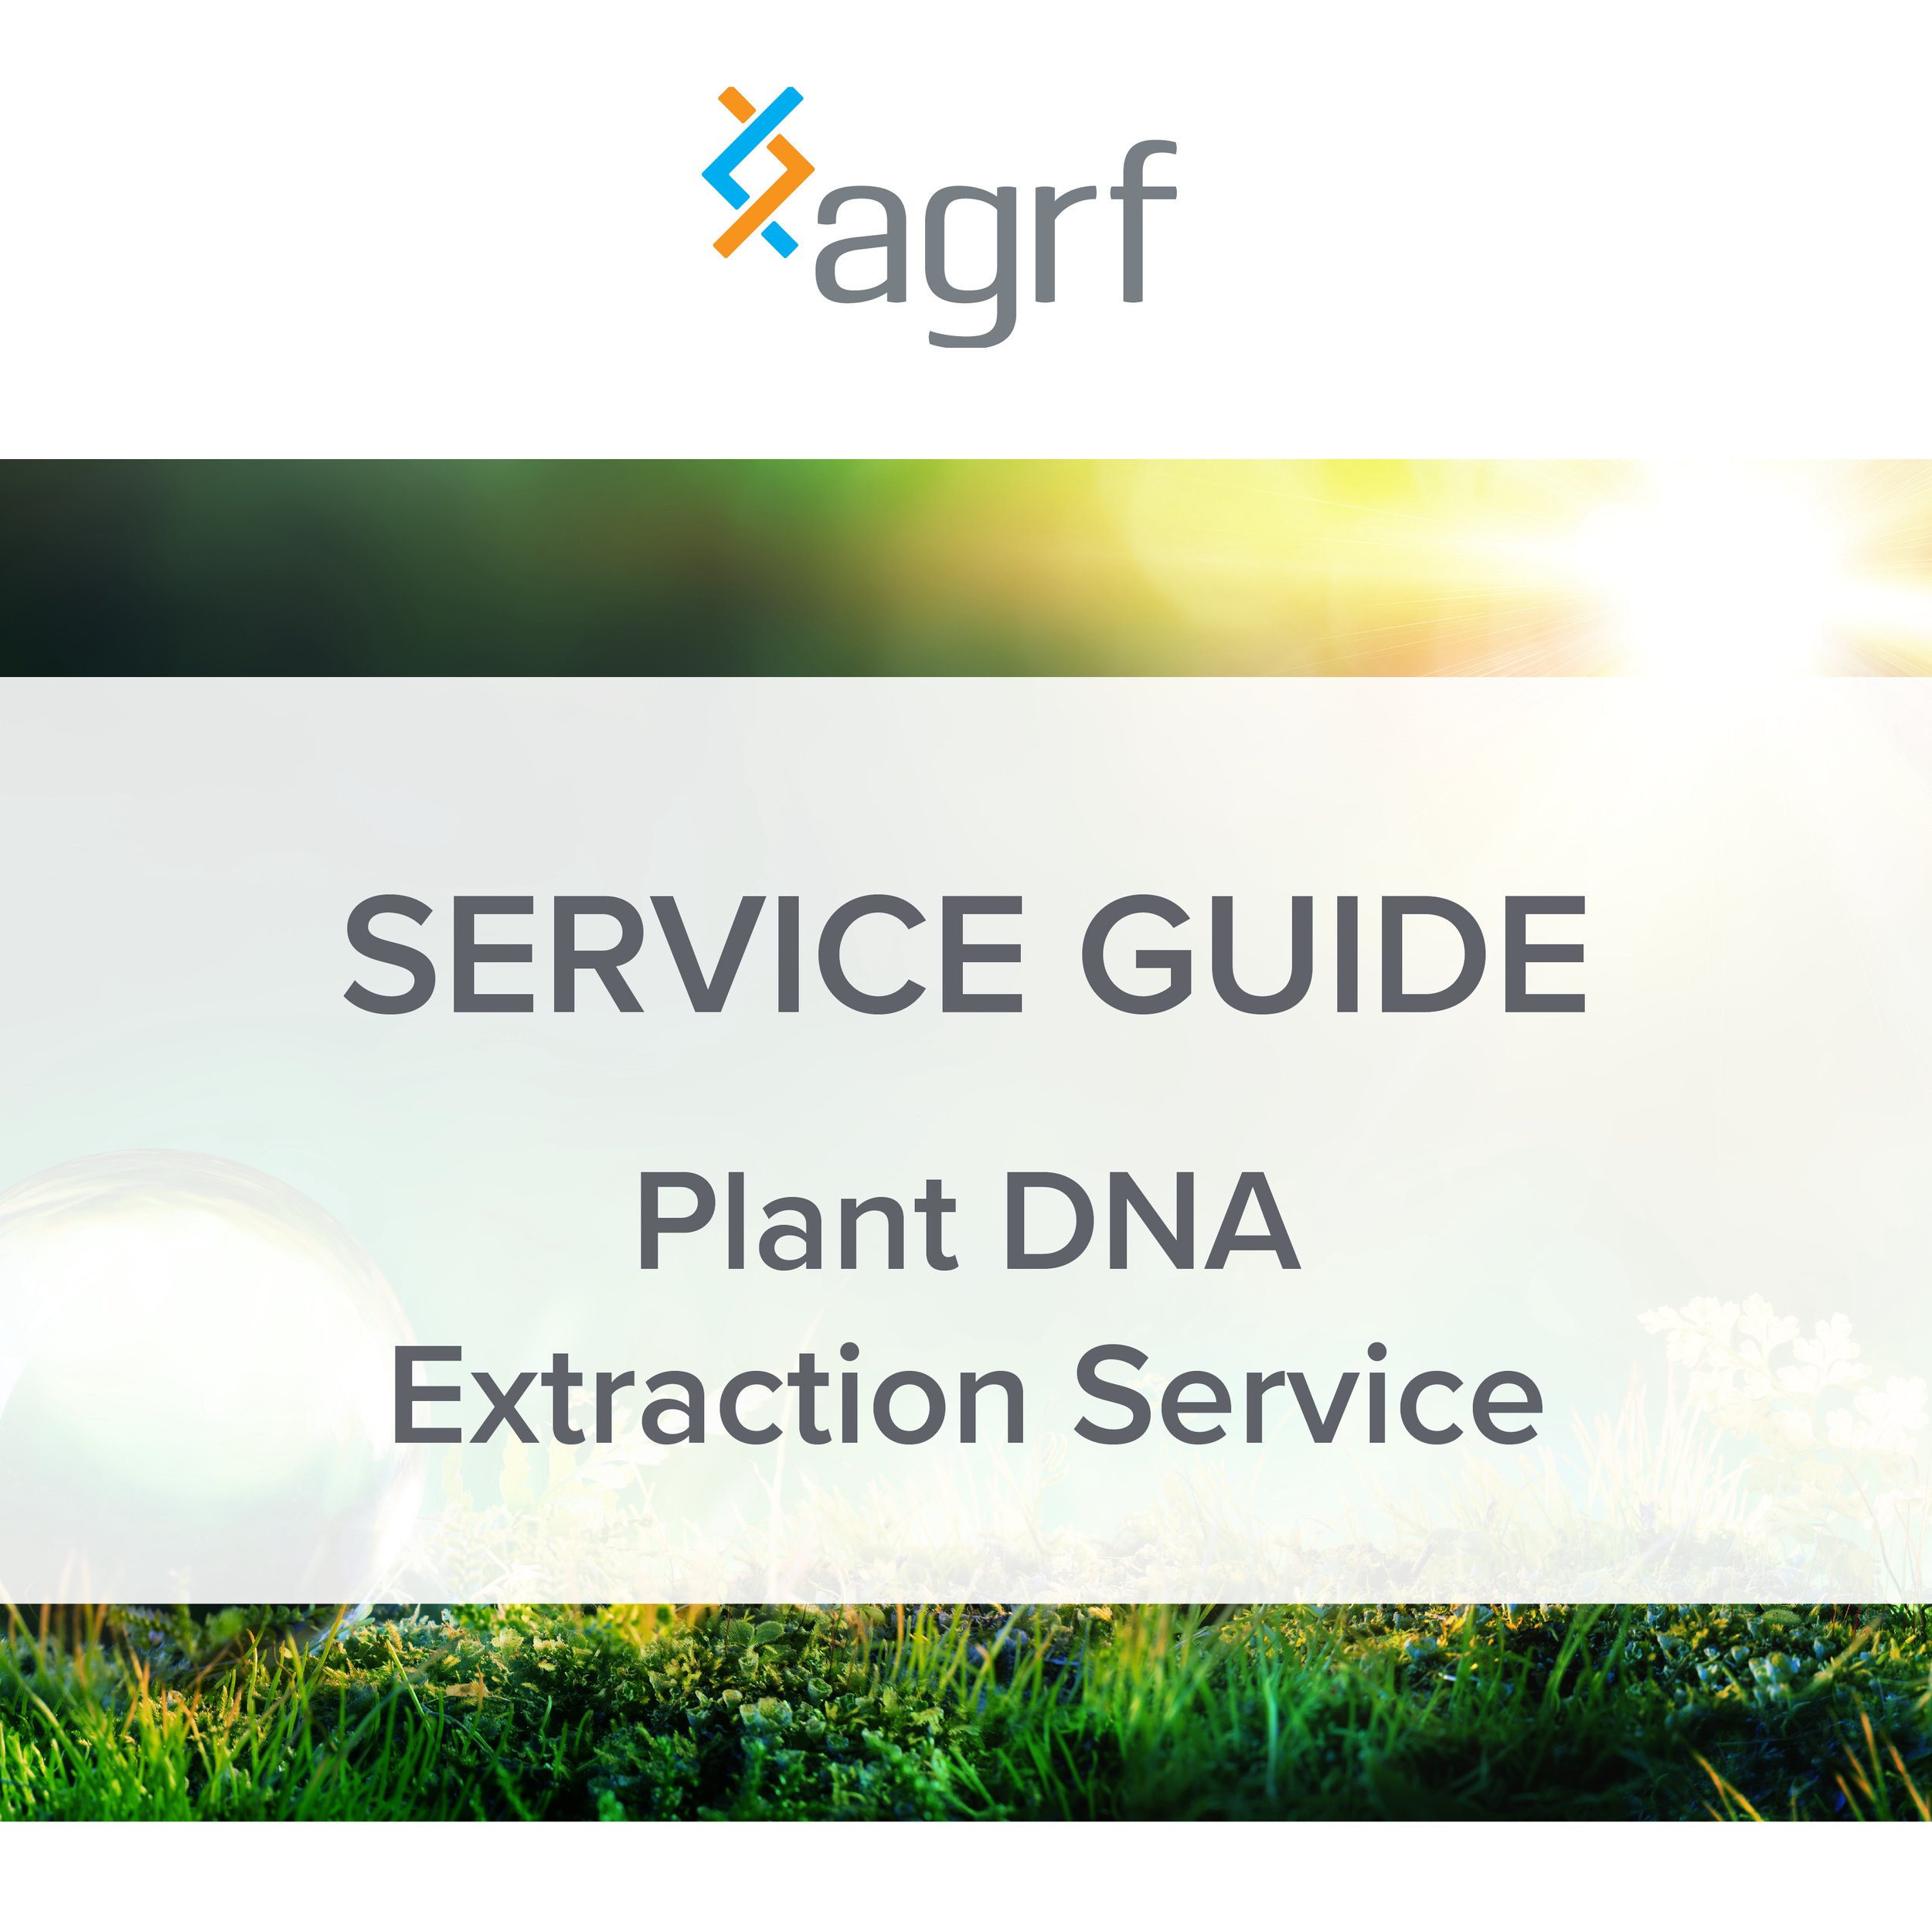 Web Tile_Service Plant DNA Extraction.jpg